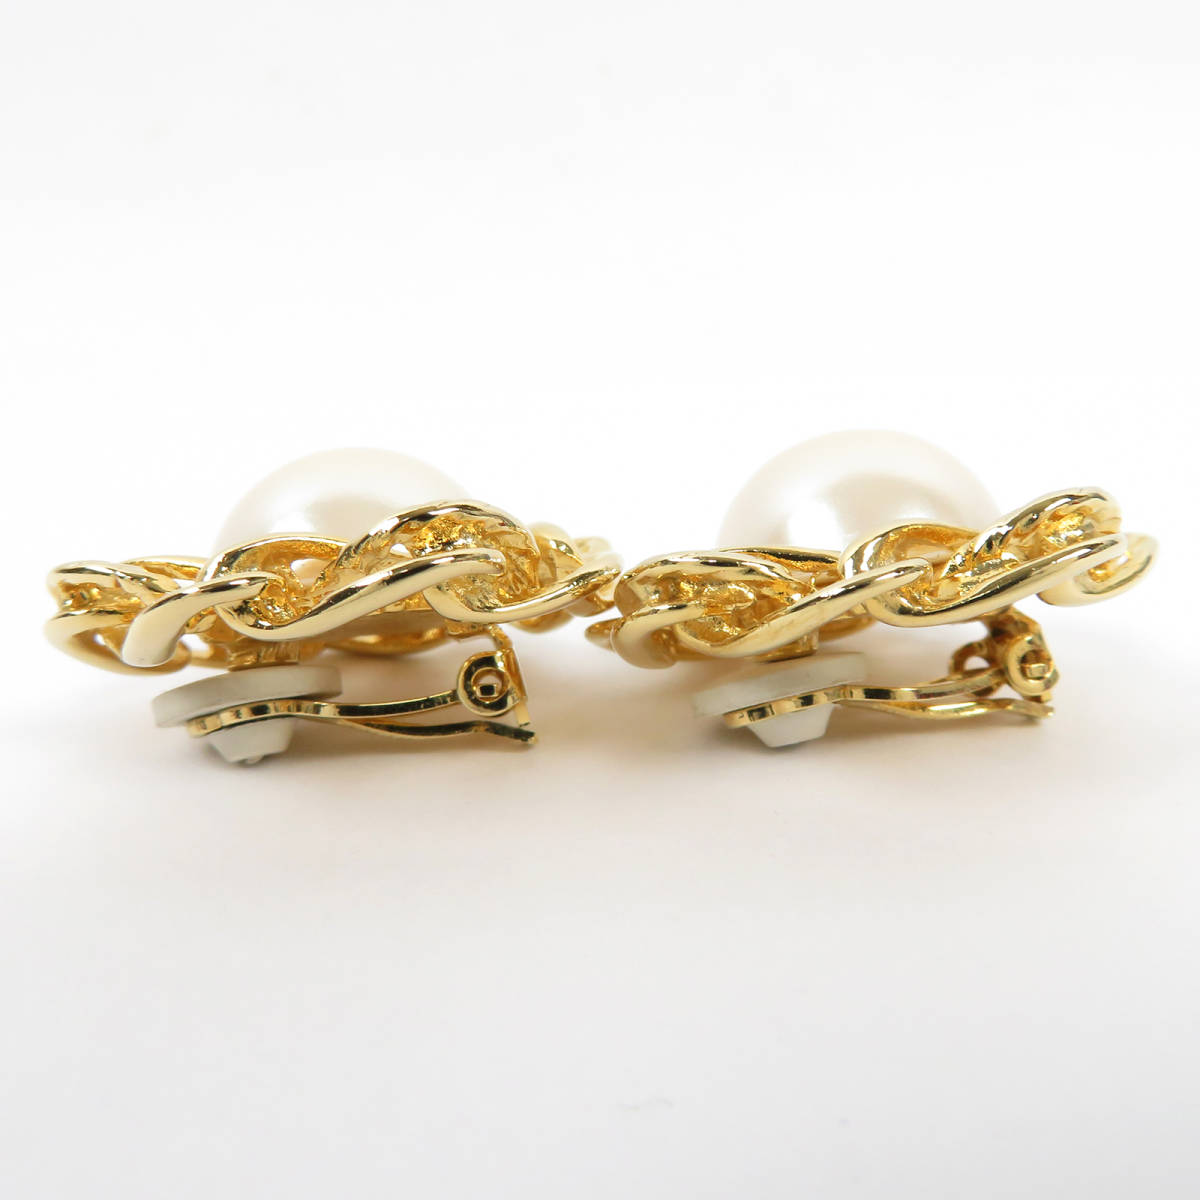  beautiful goods GIVENCHY Givenchy round chain fake pearl earrings Gold color lady's ji van si.